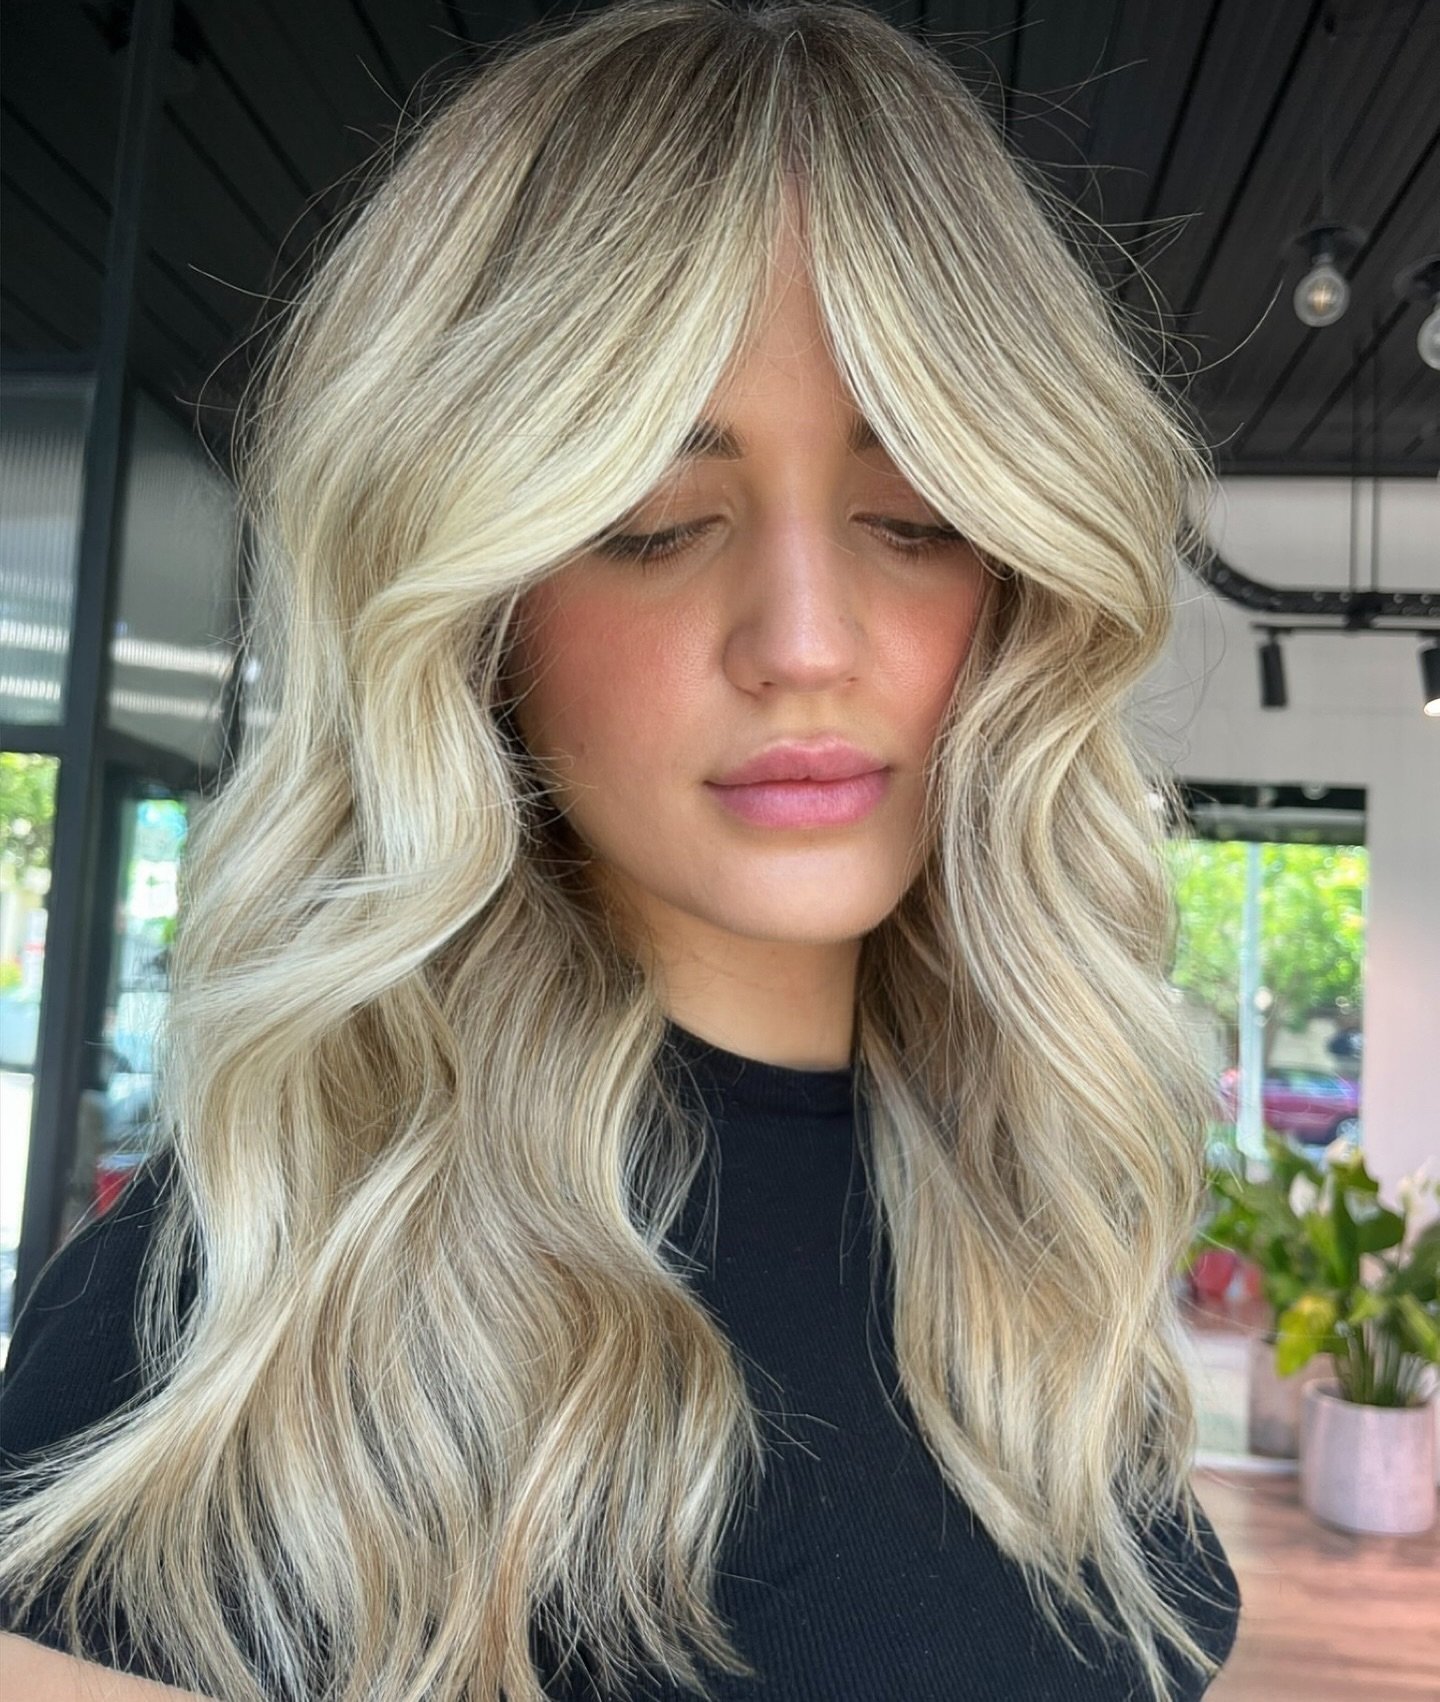 Seriously dreamy 💭 
Summer is officially over but our blondes are here to stay! 

Located - KENT TOWN - 0439 688 474 x

#hairgoals #hairdresser #hairfashion #healthyhair⁠ #betterhair #hairgameonpoint #hairofinsta #adelaidehair⁠ #hairenvy #adelaidesa